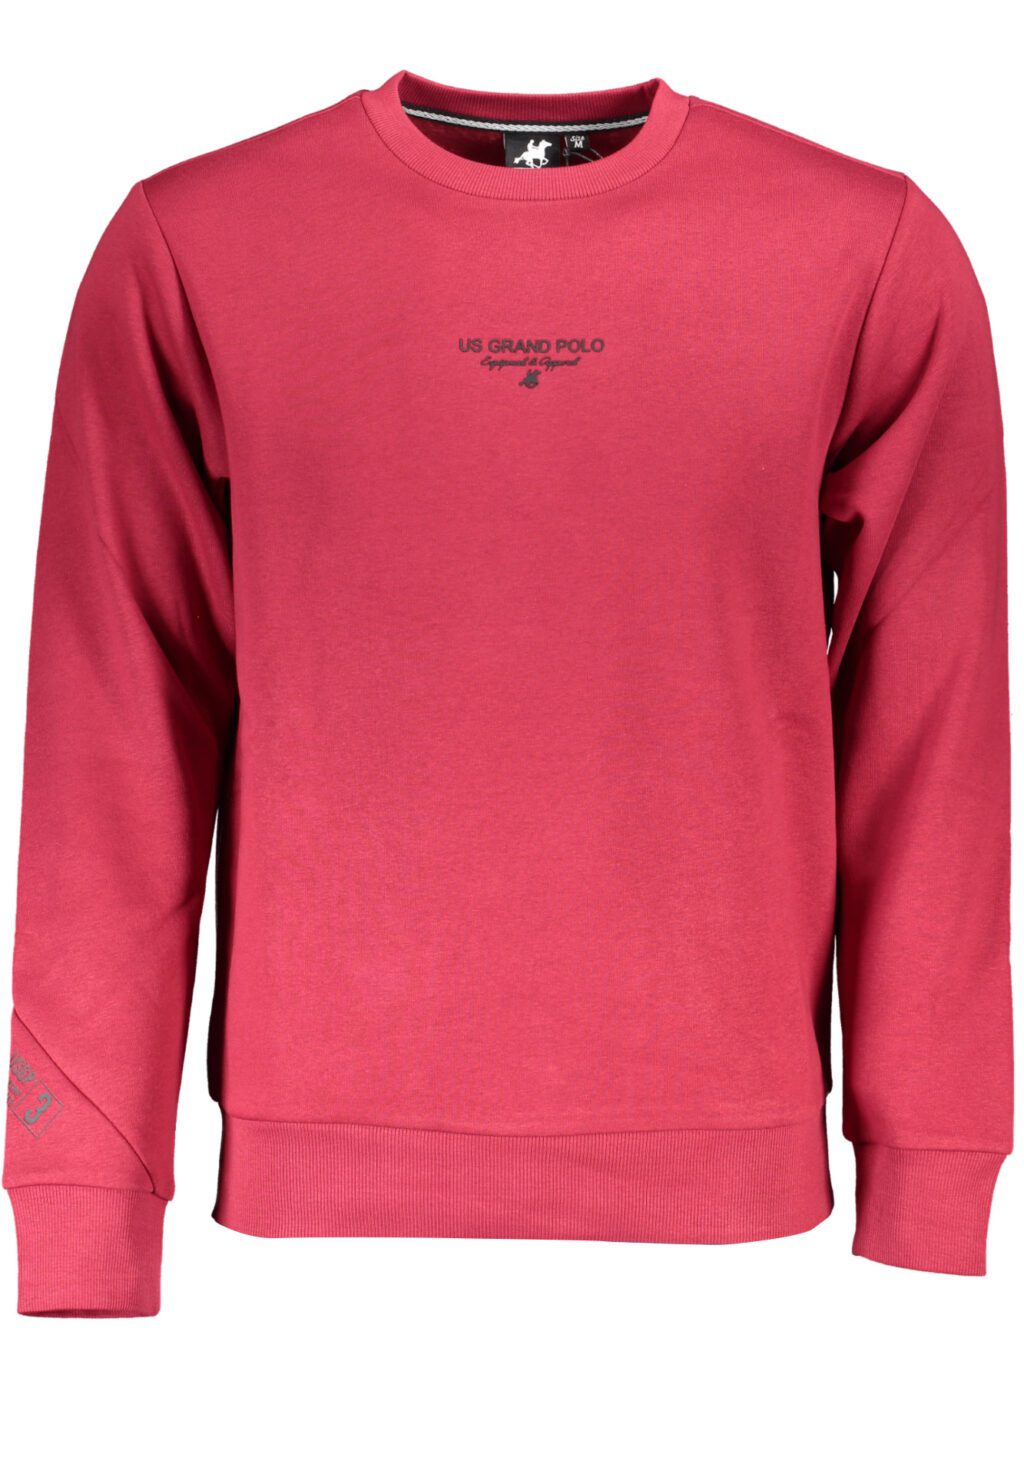 US GRAND POLO MEN'S RED ZIP-OUT SWEATSHIRT USF895_ROROSSO